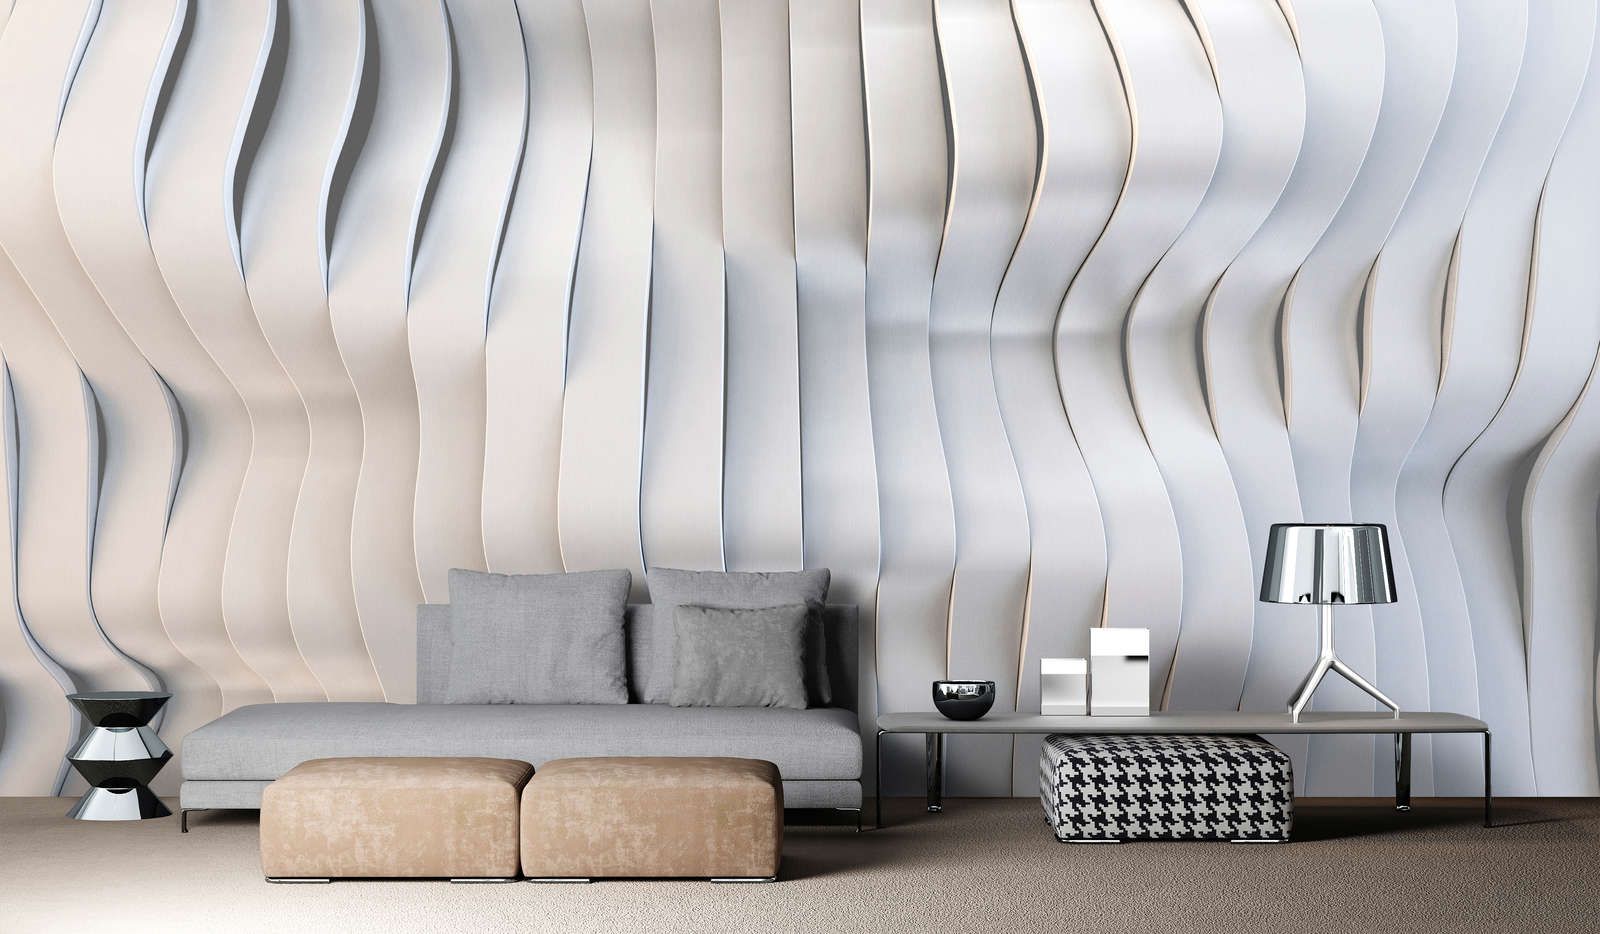             solaris 1 - Photo wallpaper in futuristic streamline design - Smooth, slightly pearly shimmering non-woven fabric
        